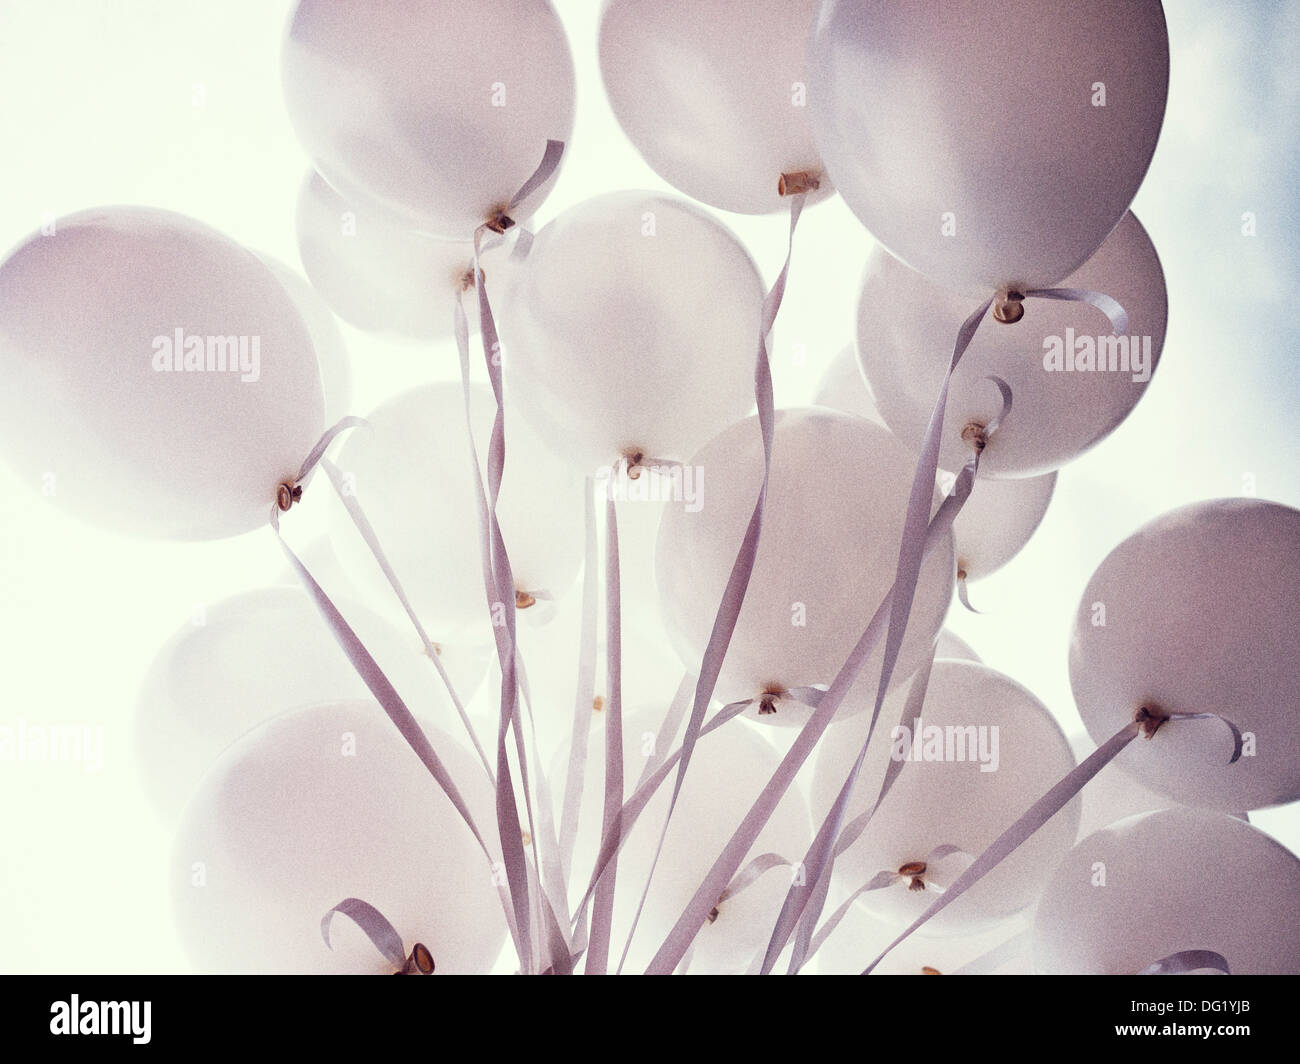 Bouquet of Pink Helium Balloons with Pink Ribbons, Low Angle View Stock Photo